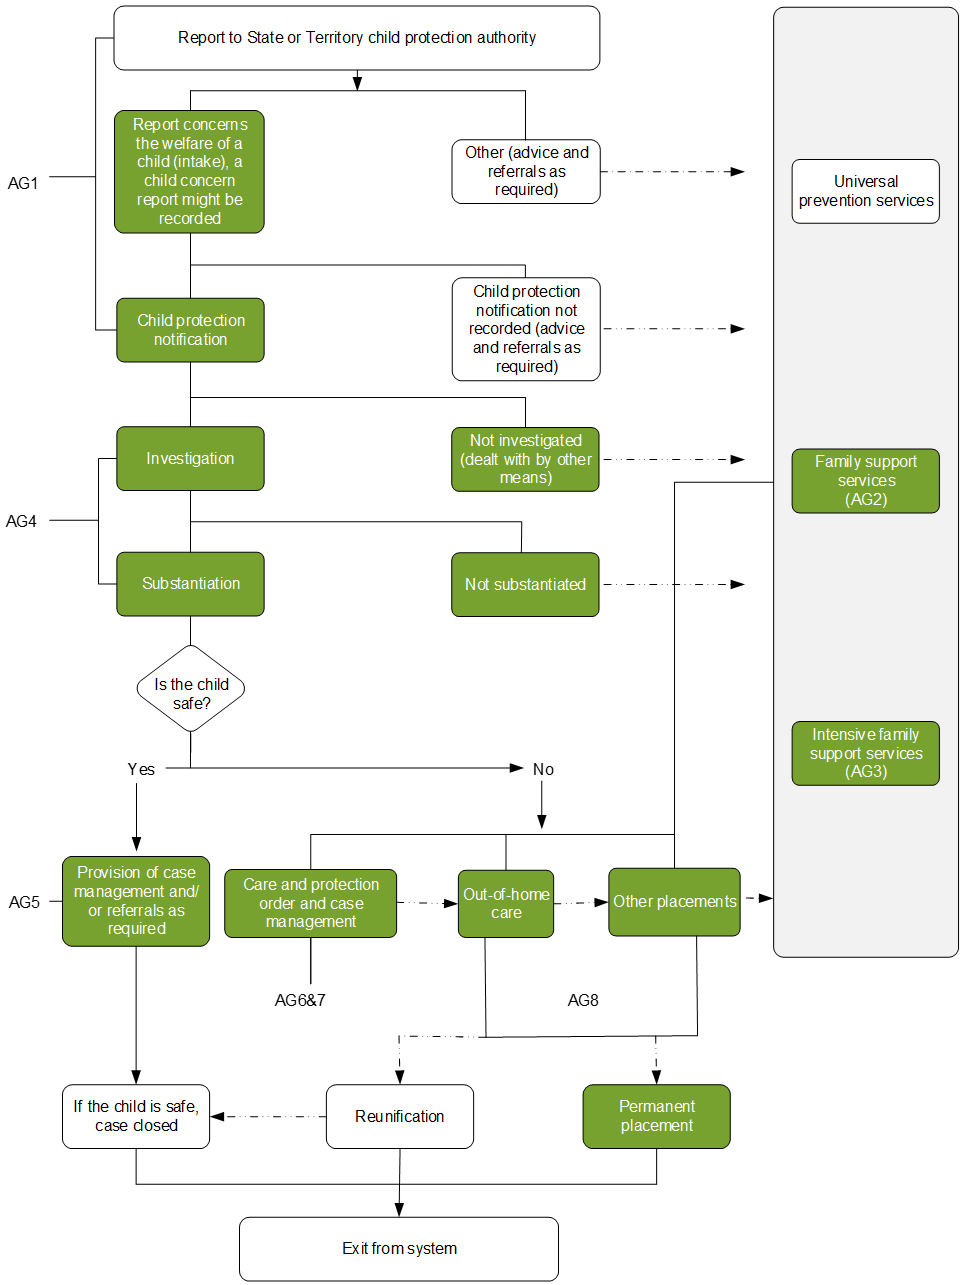 Figure 16.1 The child protection services system. More details can be found within the text surrounding this image.